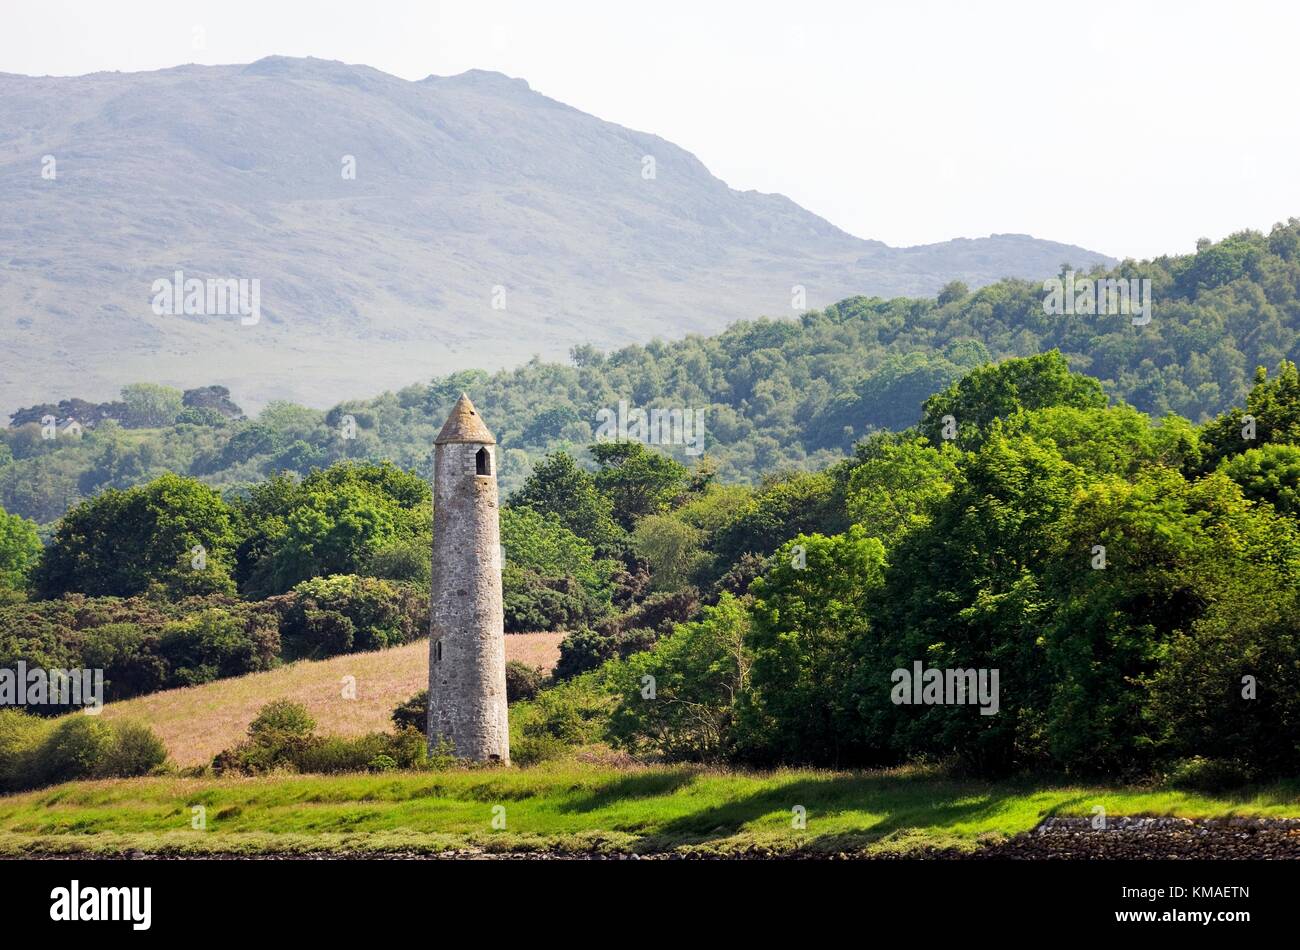 Cornamucklagh round tower. A 19 C navigational aid near Omeath on the Cooley peninsula, County Louth, Ireland. South from the top of Carlingford Lough Stock Photo